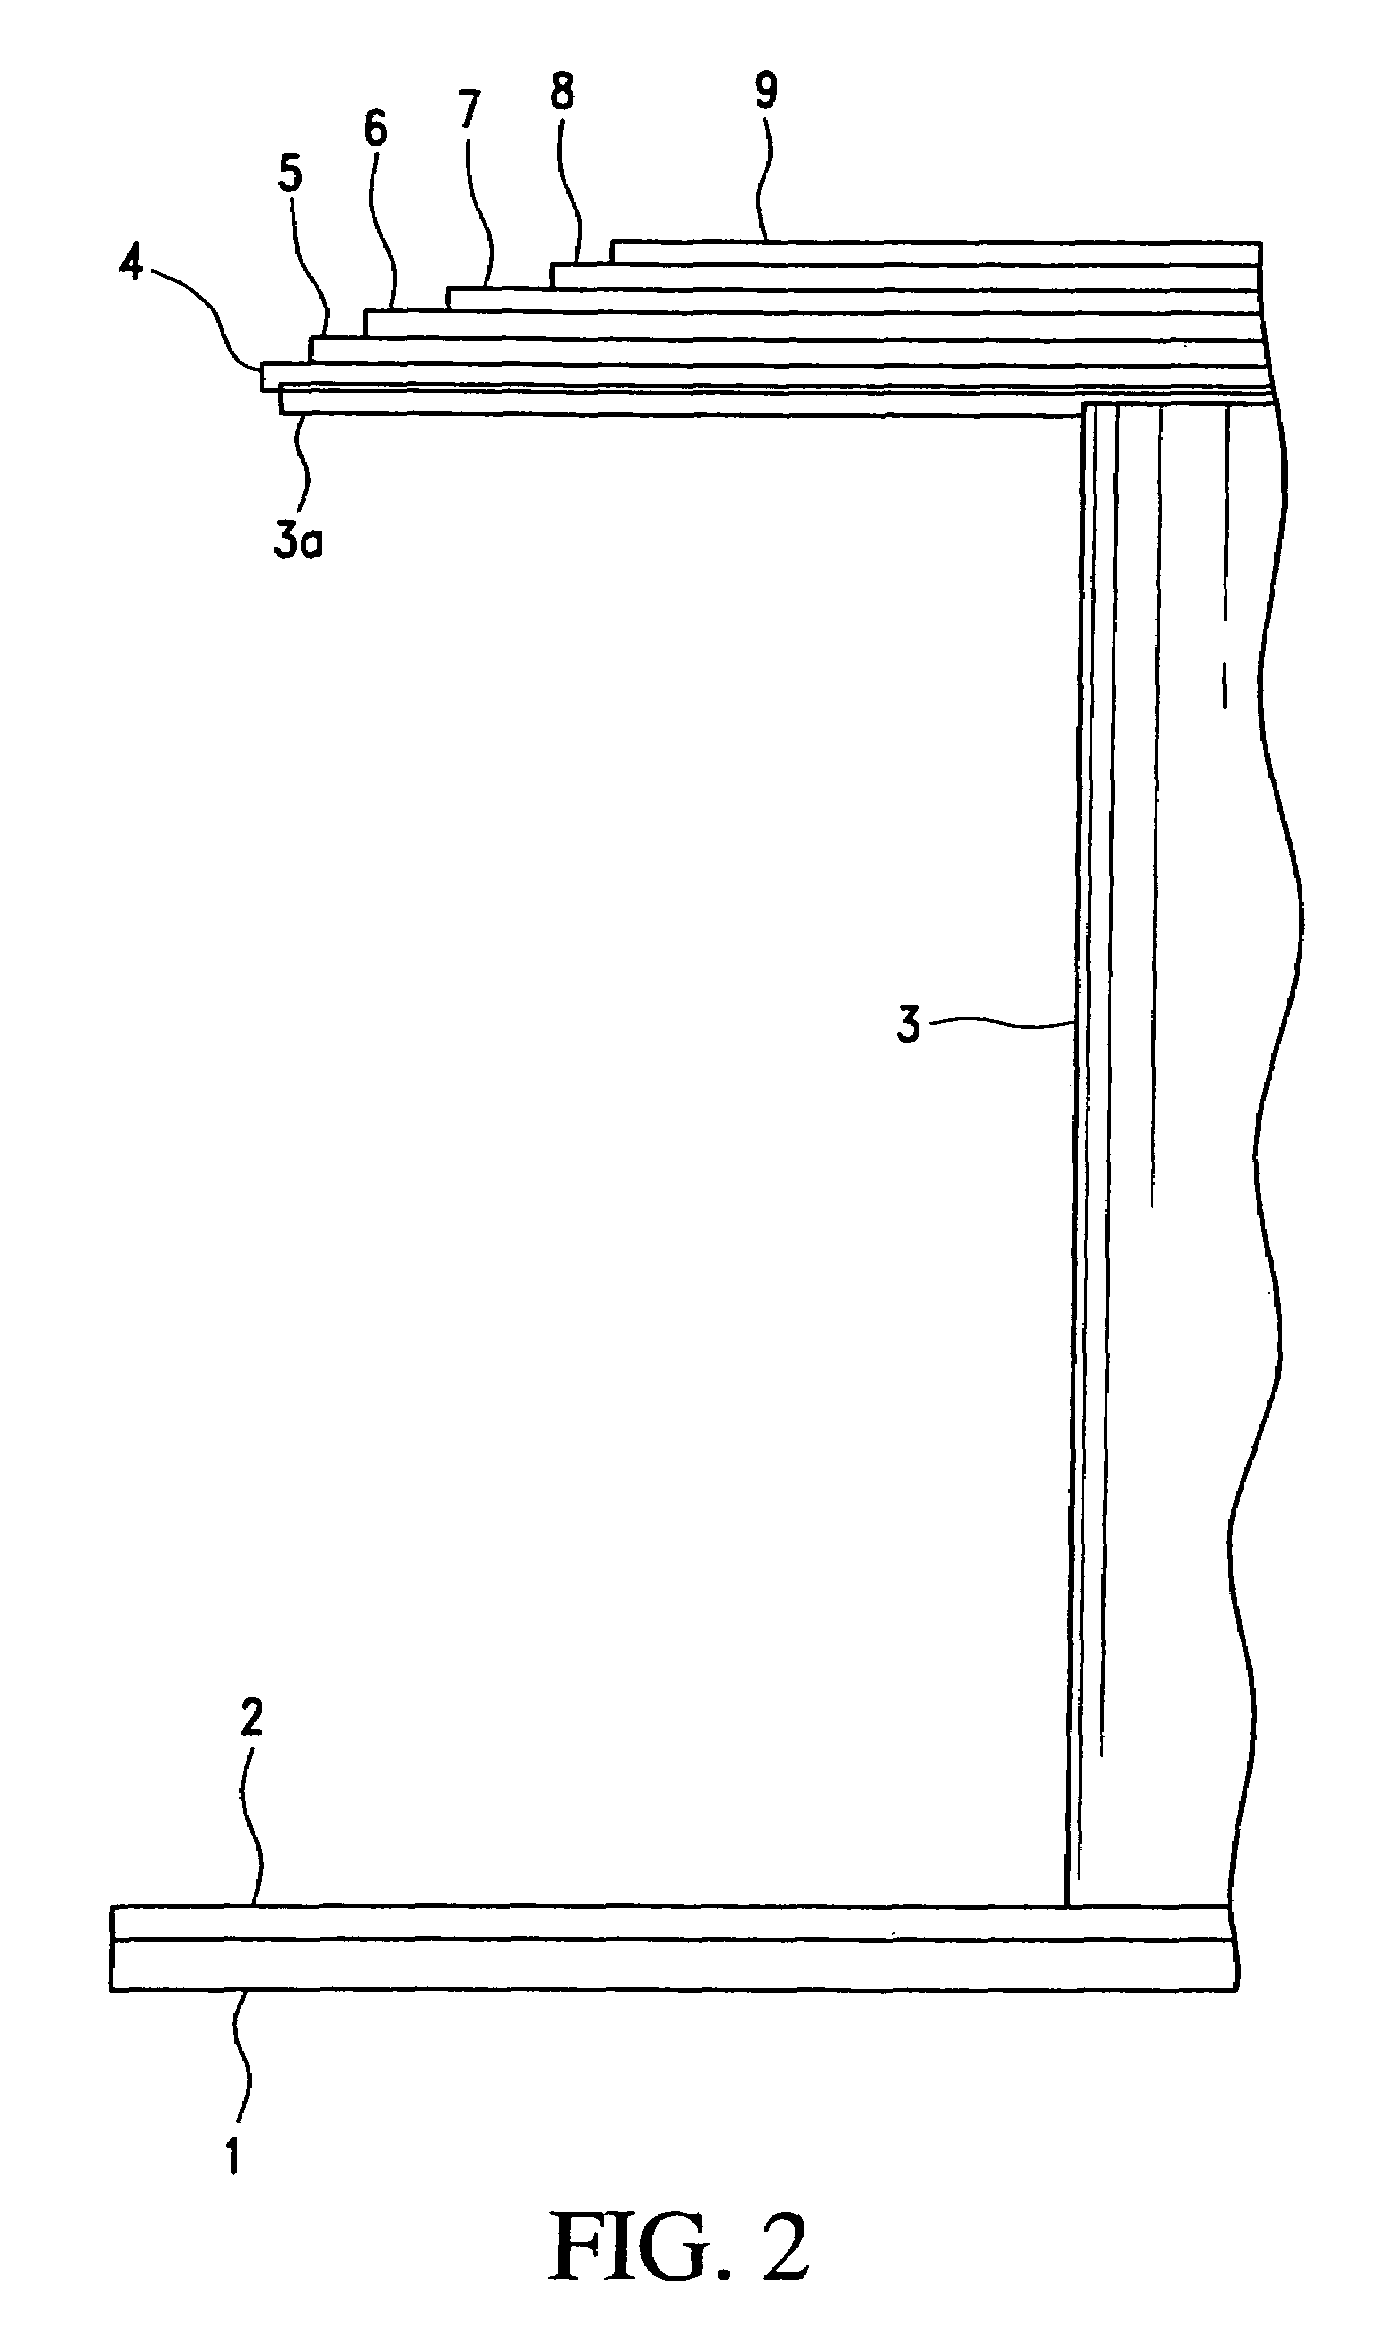 Permeable conductive shield having a laminated structure